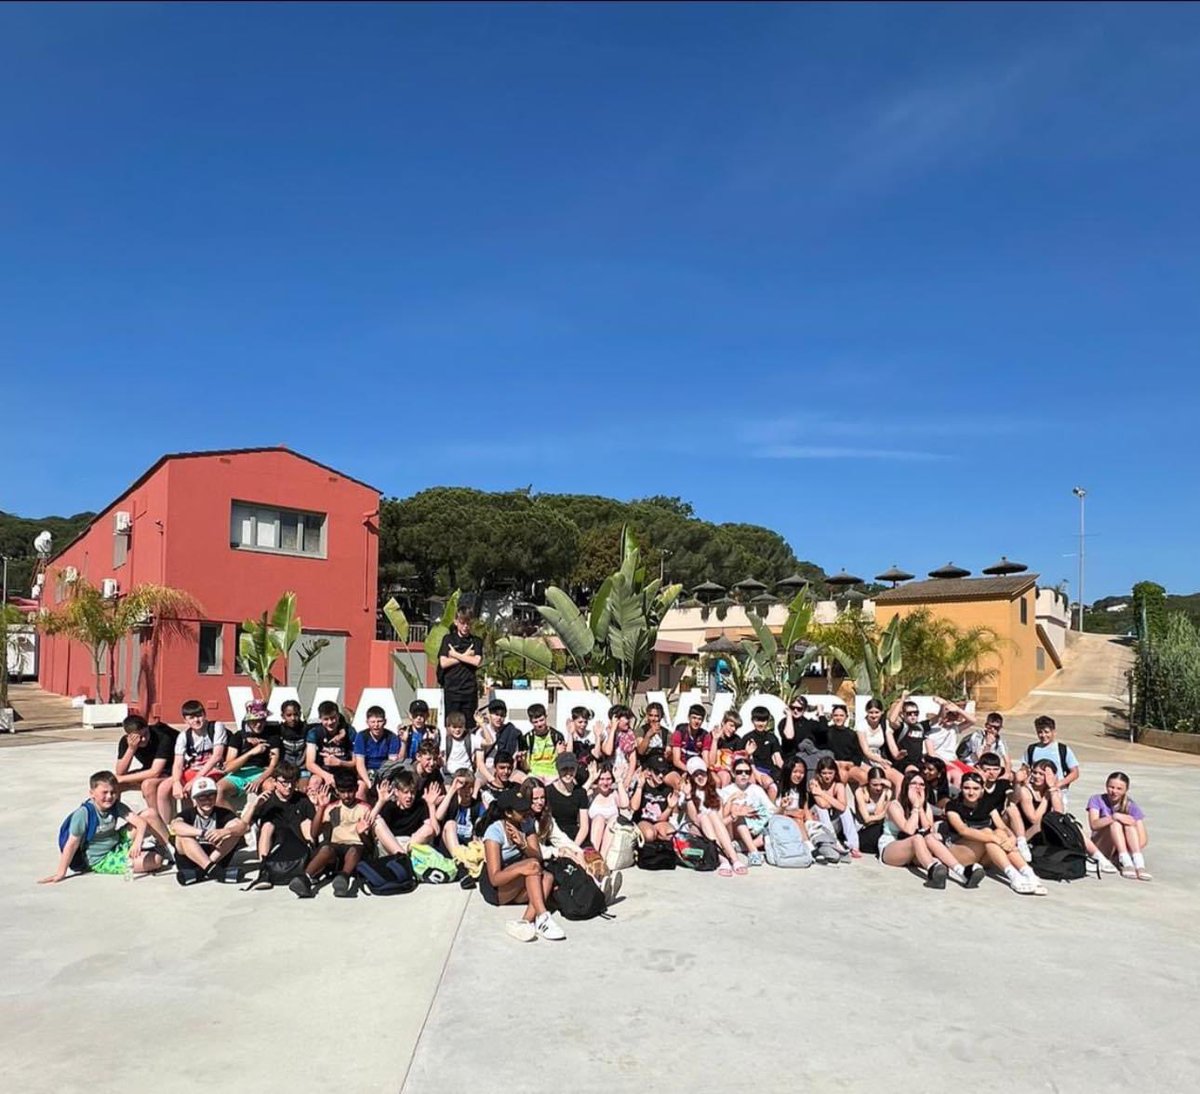 Yesterday was a busy day for our Spanish crew, visiting the Salvador Dali museum in the afternoon, swimming in the pool, followed by a walk and football on the beach. They have just arrived at the Water park today and it’s a lovely sunny day! #romerosontour